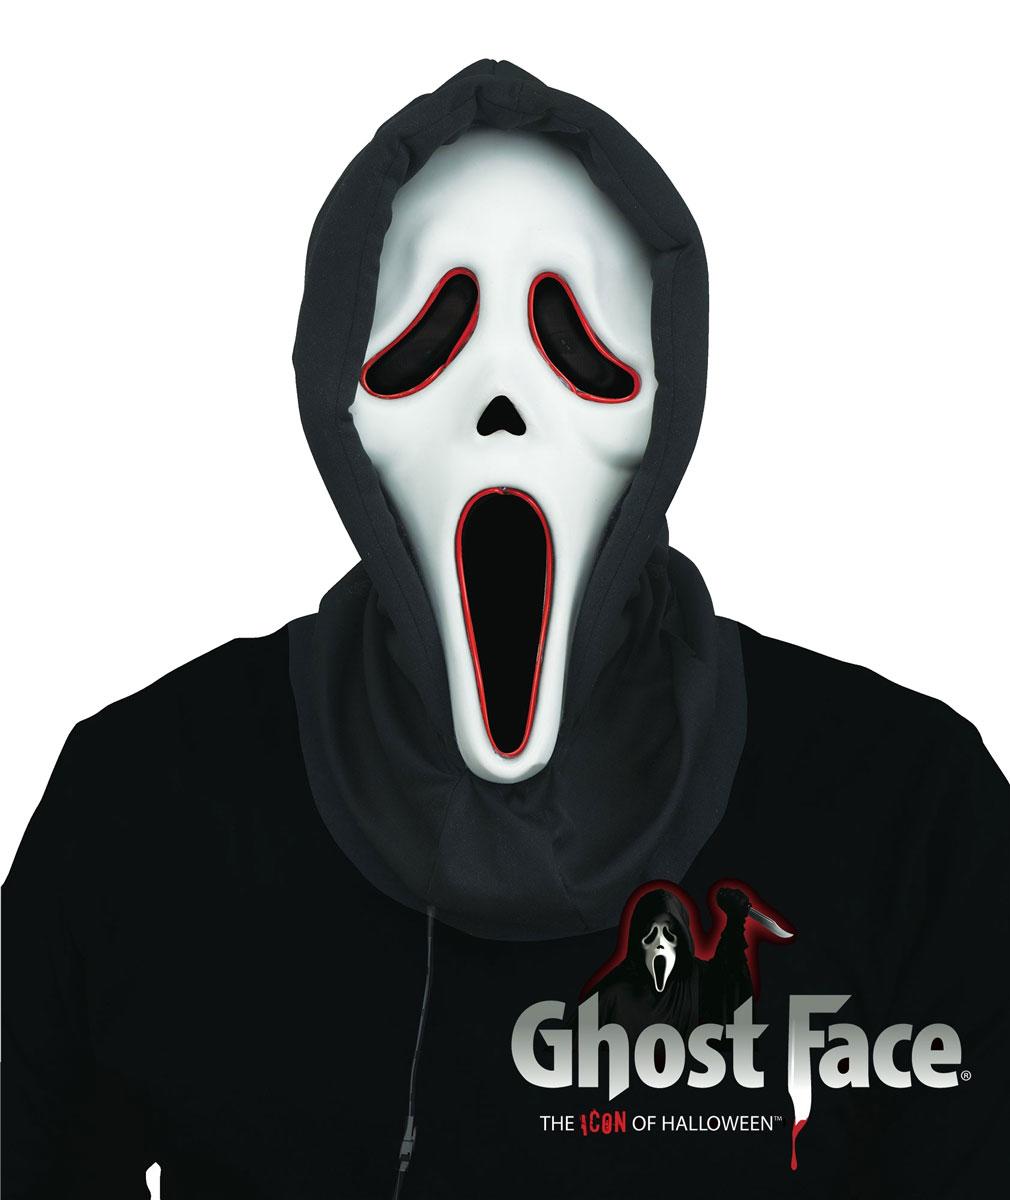 Deluxe Illumo Ghostface Mask - Ghost Face®  Mask by Fun World 93406 available here at Karnival Costumes online party shop